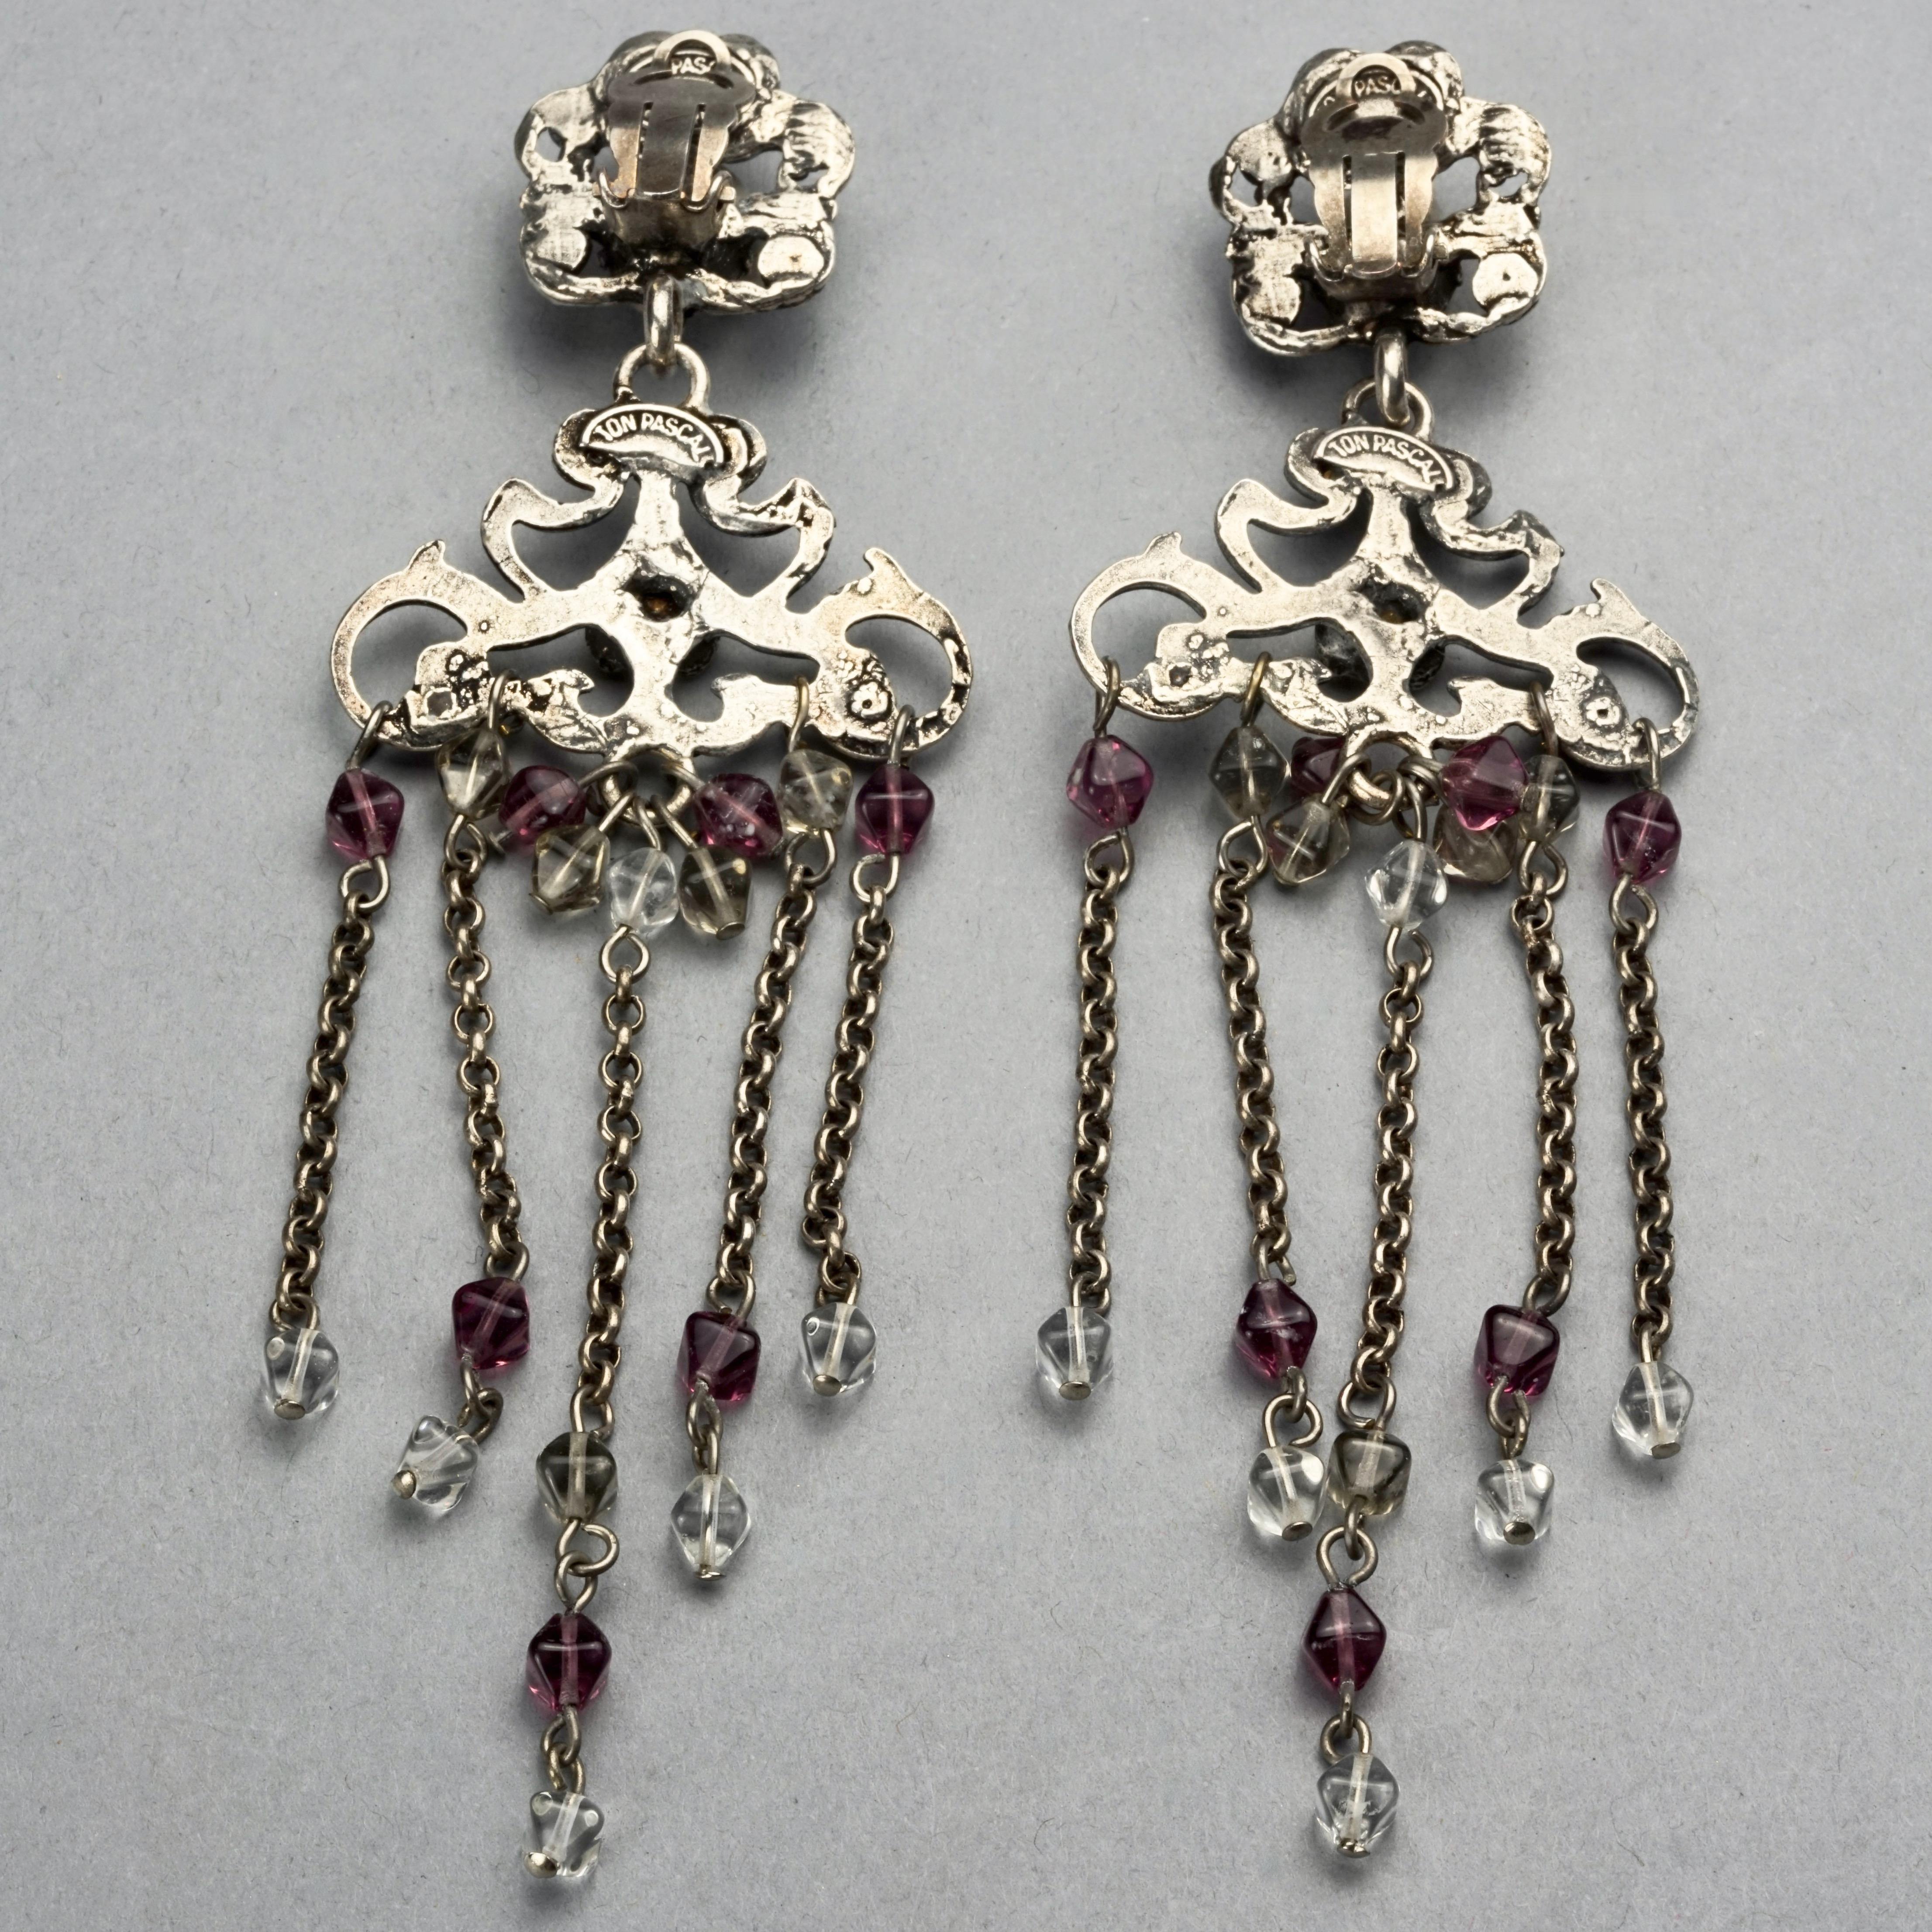 Vintage TON PASCAL Jewelled Baroque Cascading Chain Dangling Earrings For Sale 4